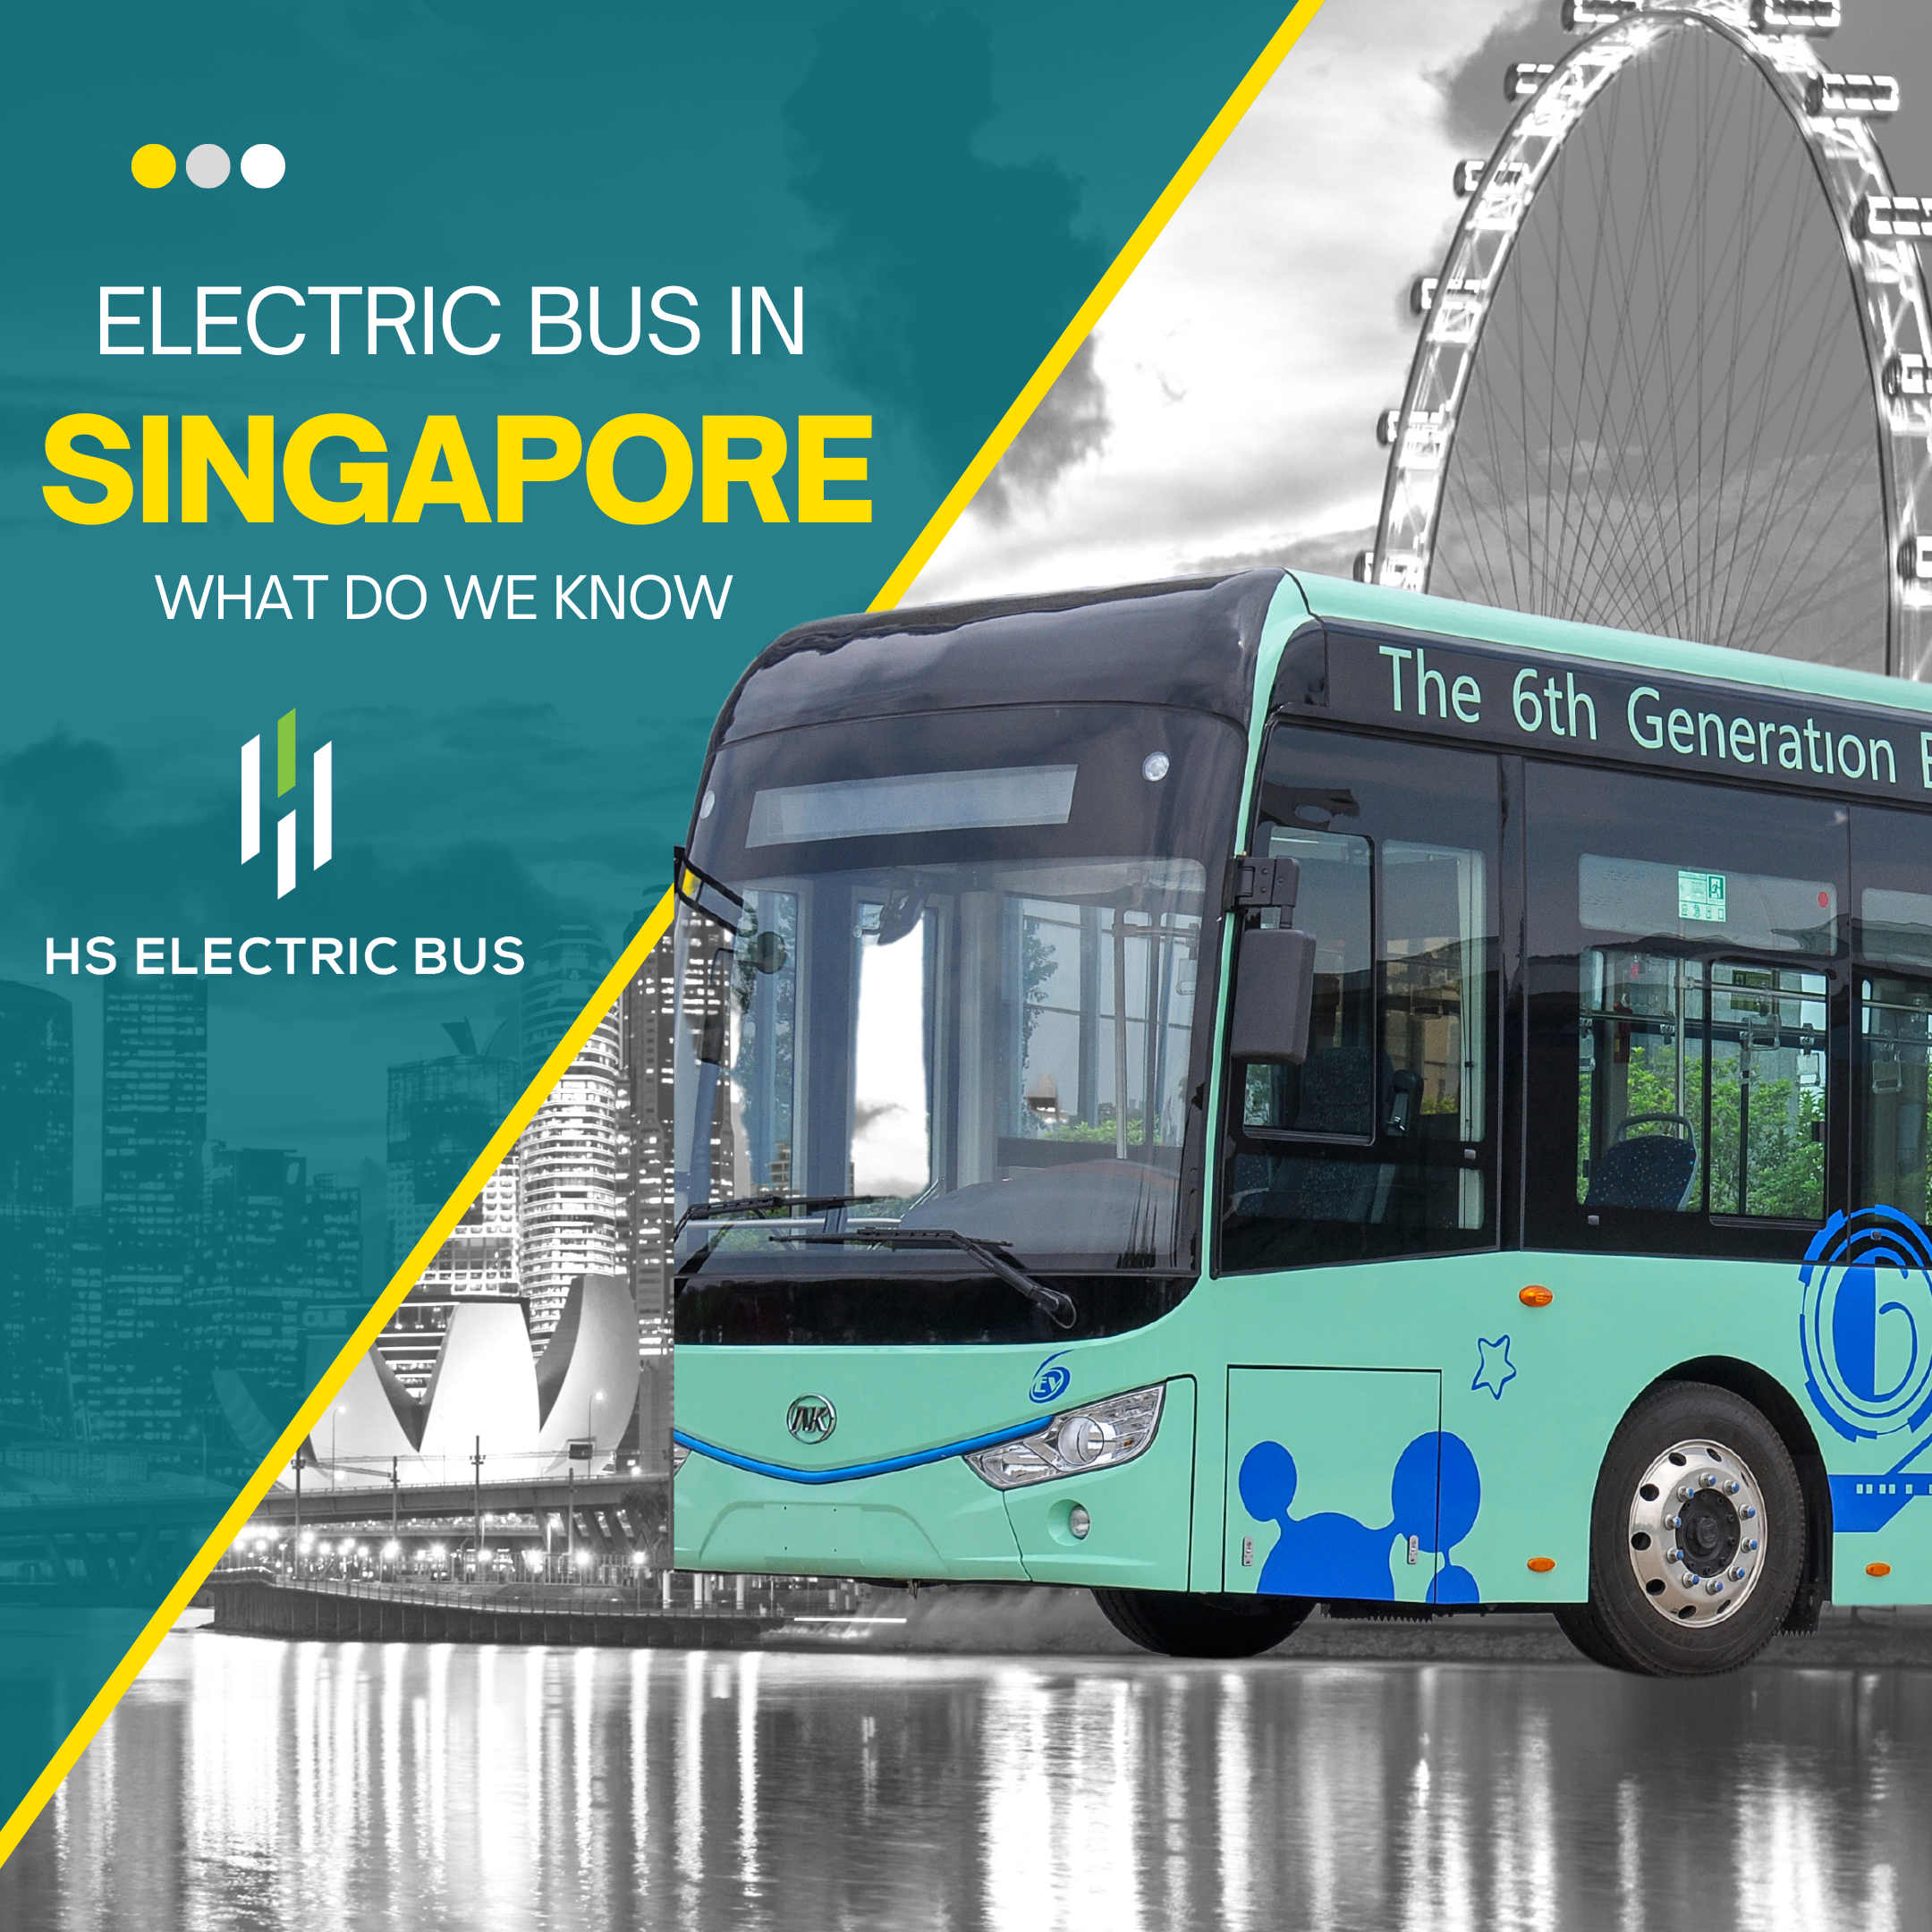 Photo of an electric bus in Singapore with the city skyline in the background. The bus is green and white with the words 'HS Electric Bus' on the side. Passengers are visible through the windows, and the bus is parked at a charging station with overhead wires.